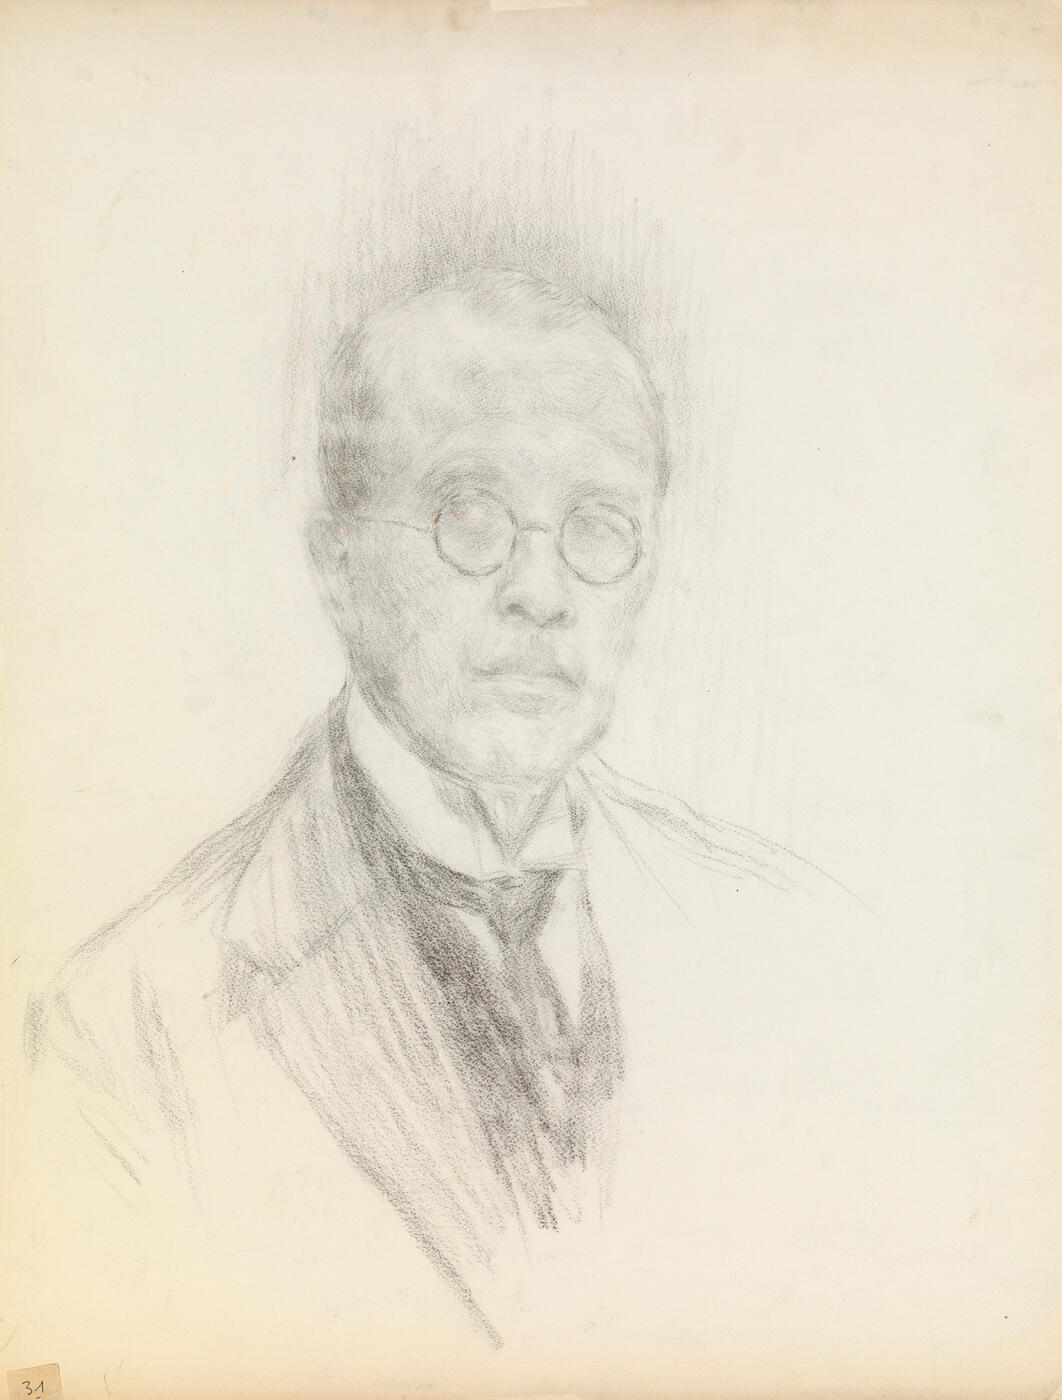 Self-Portrait and A Collection of Sketches,  13 works